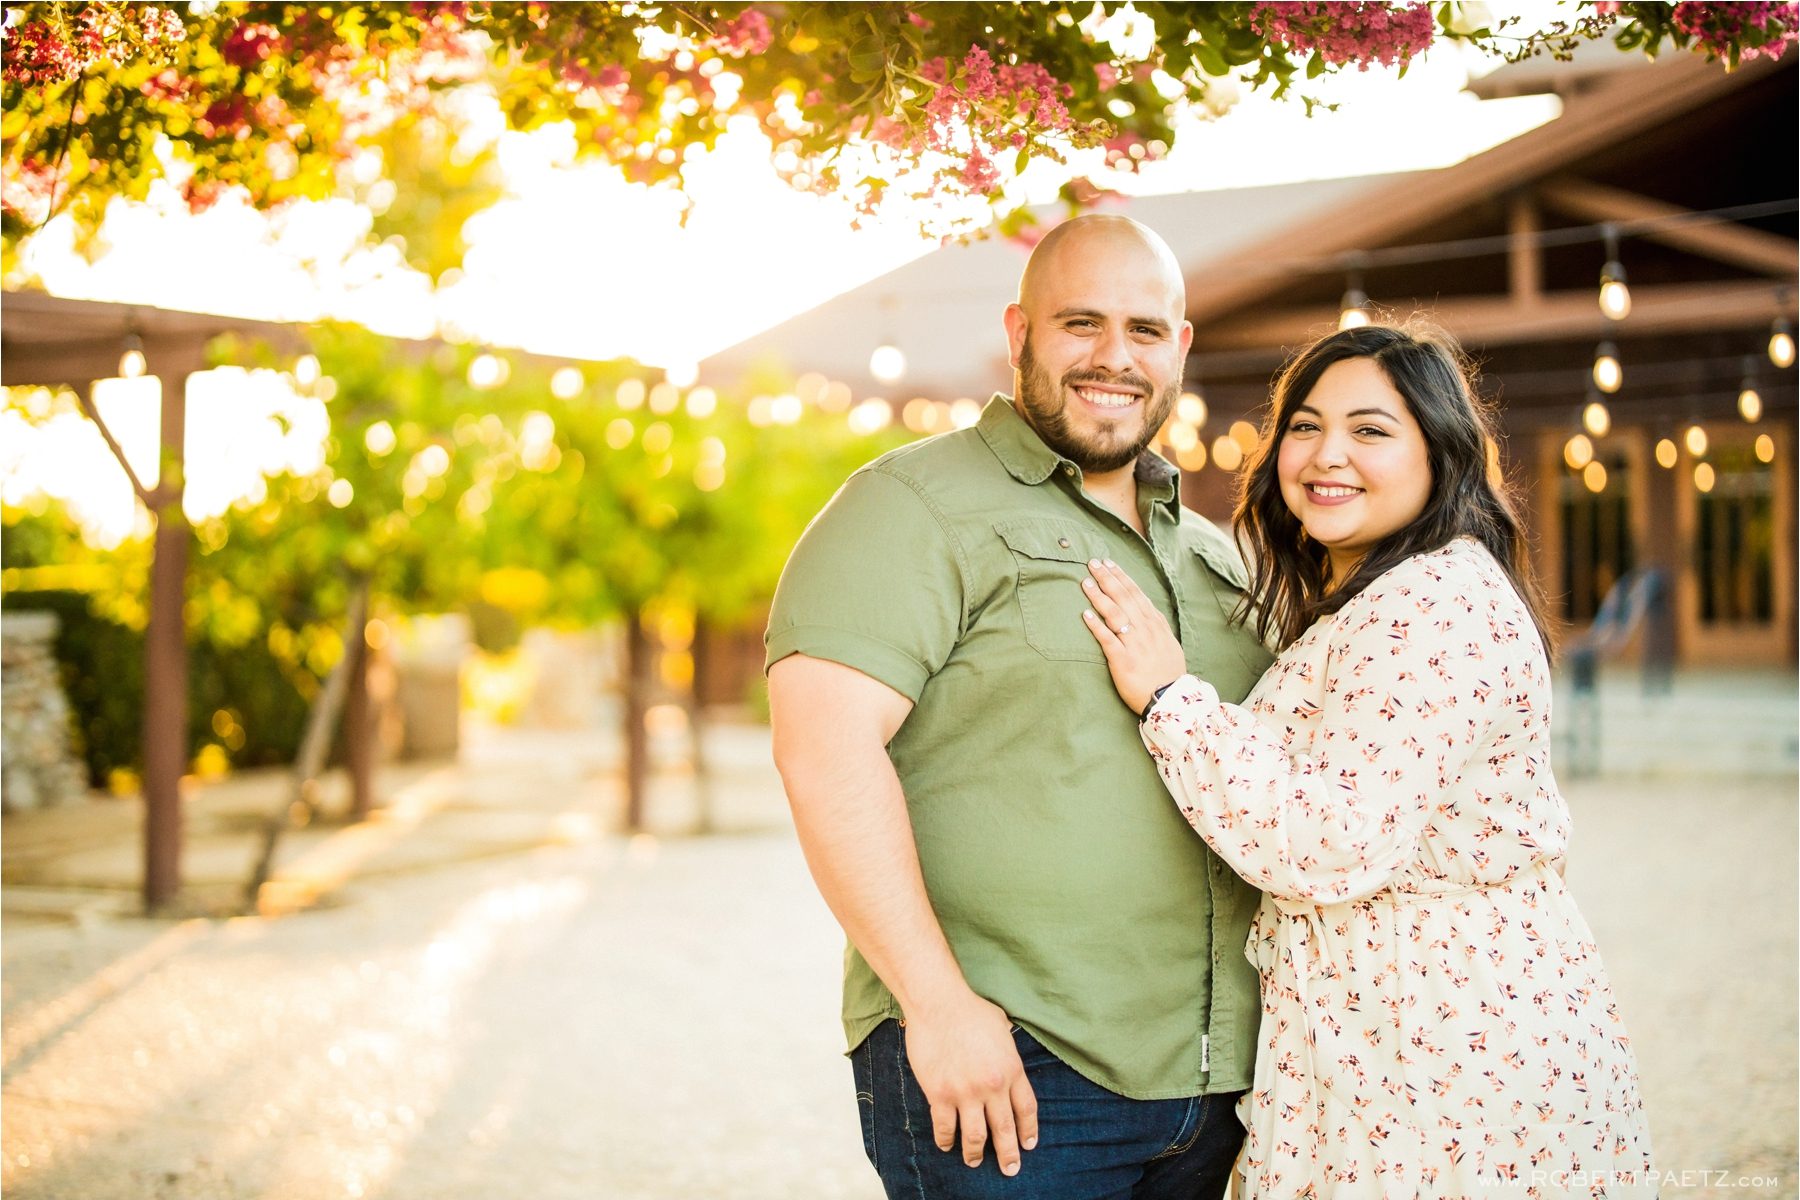 Engagement photography session taking place at the California Citrus State Historic Park in Riverside, California. The session was photographed by the destination wedding photographer, Robert Paetz.